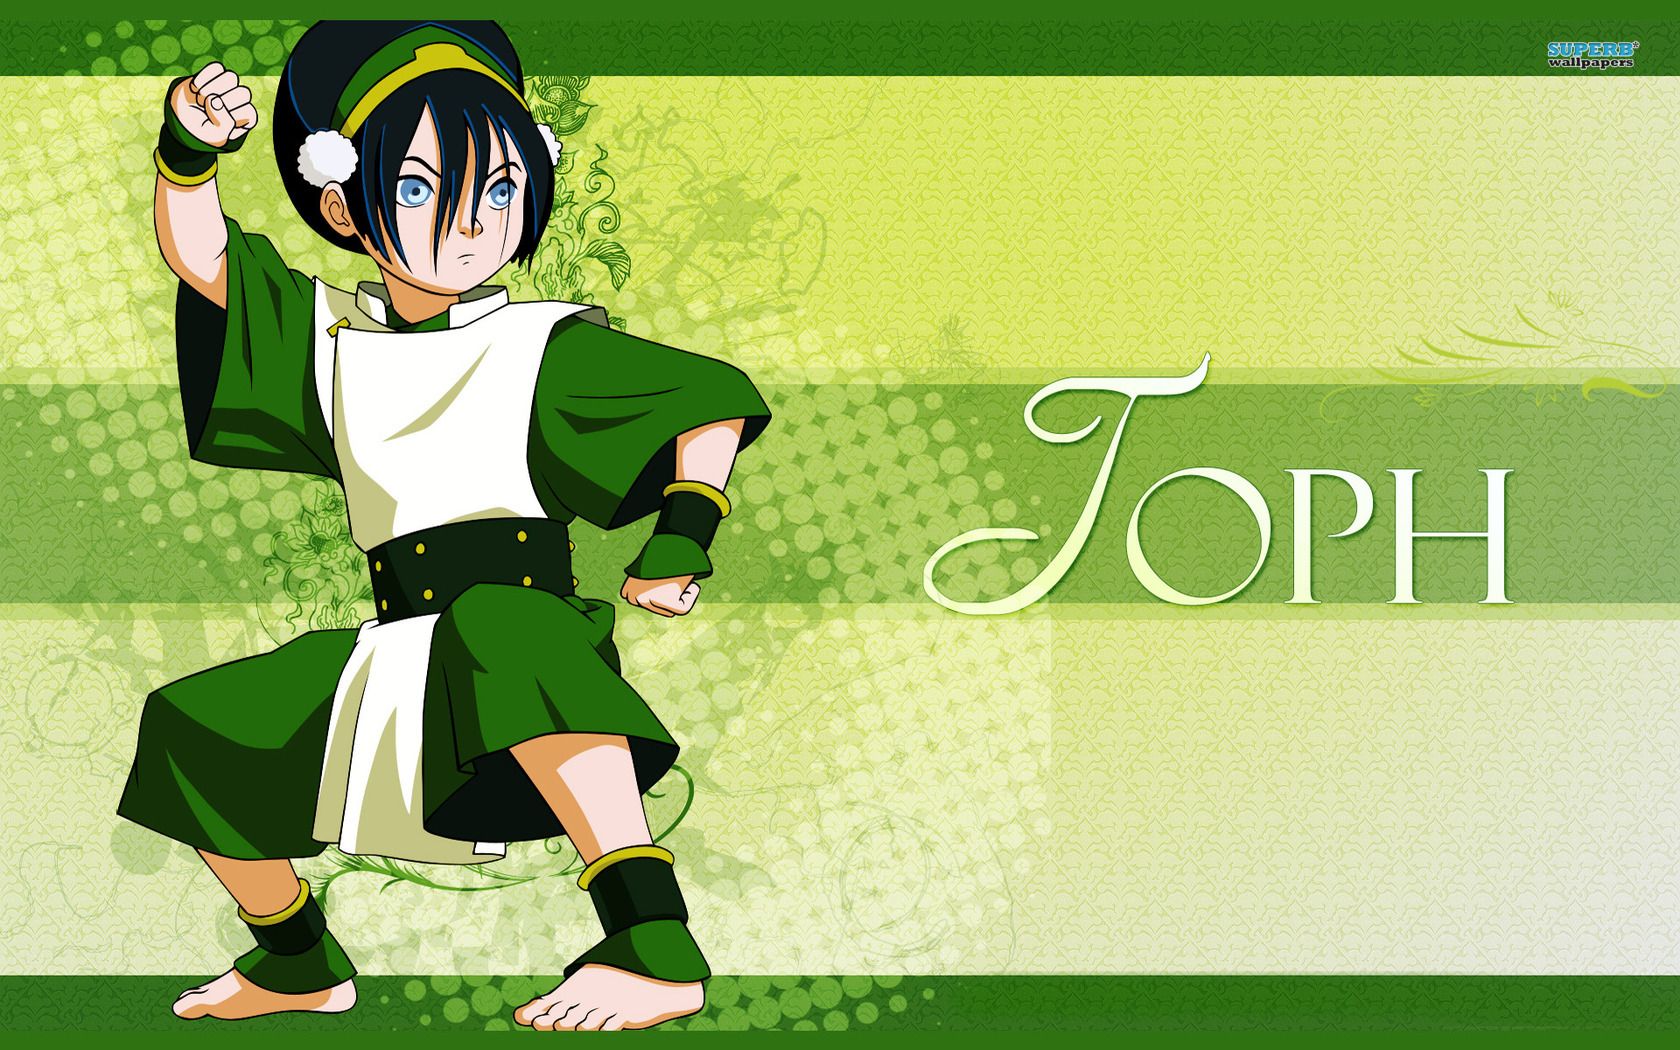 Toph Beifong Avatar The Last Airbender Wallpaper Anime